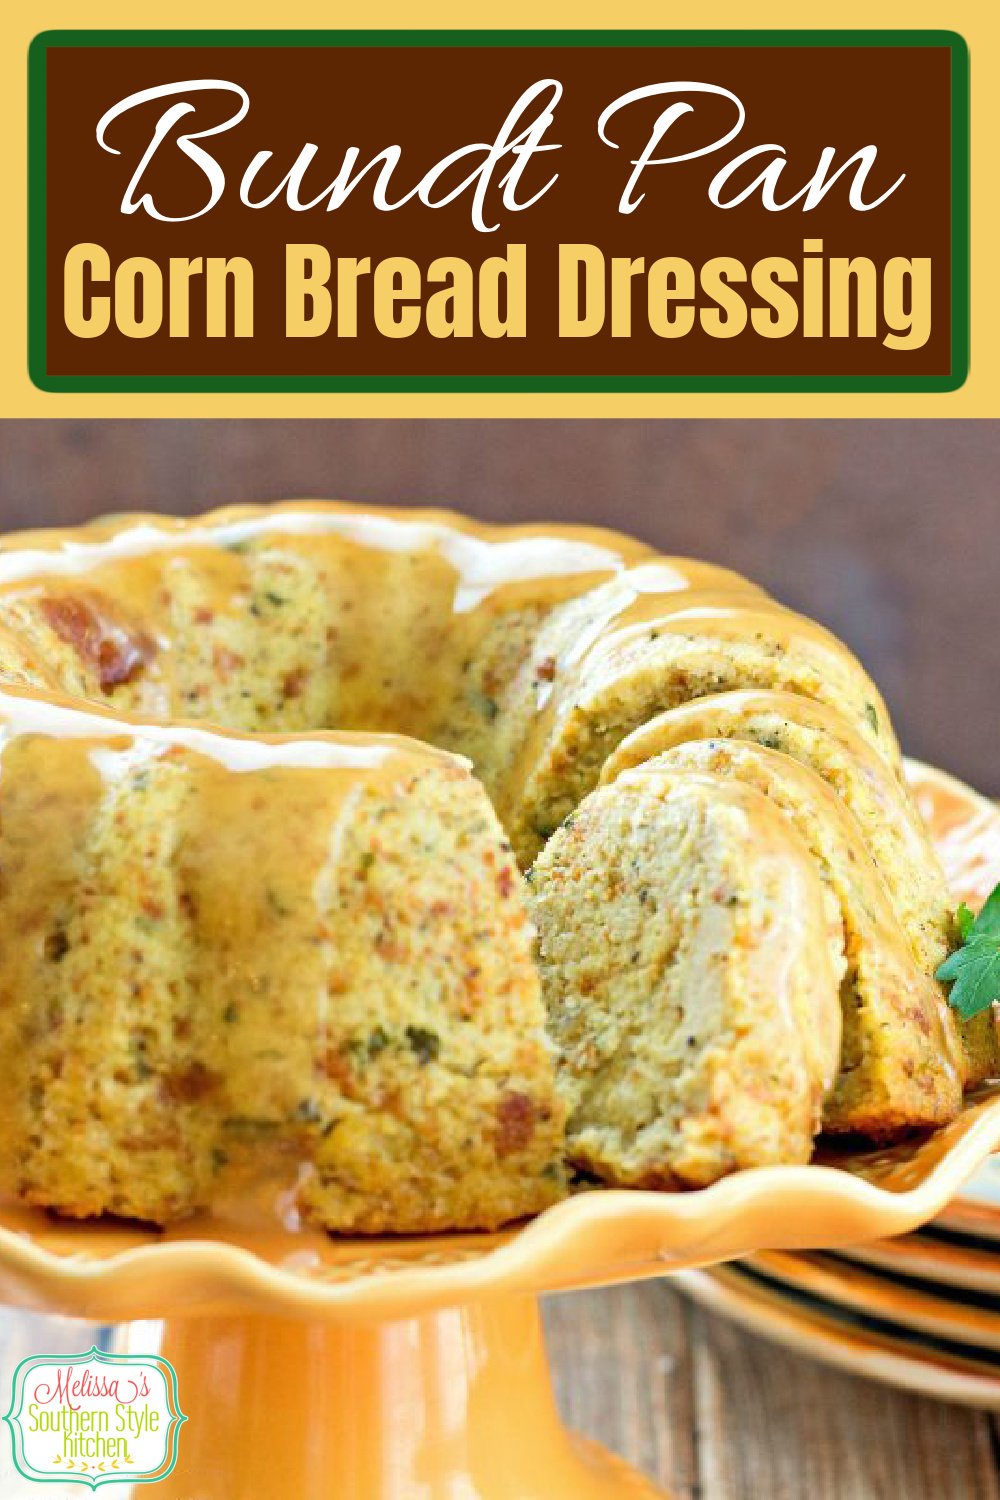 Make mouthwatering Bundt Pan Herbed Corn Bread Dressing for Thanksgiving drizzled with gravy #bundtpandressing #cornbreaddressing #southernfood #cornbread #cornbreaddressingrecipes #southernrecipes #thanksgiving #holidaysides #sidedishrecipes via @melissasssk